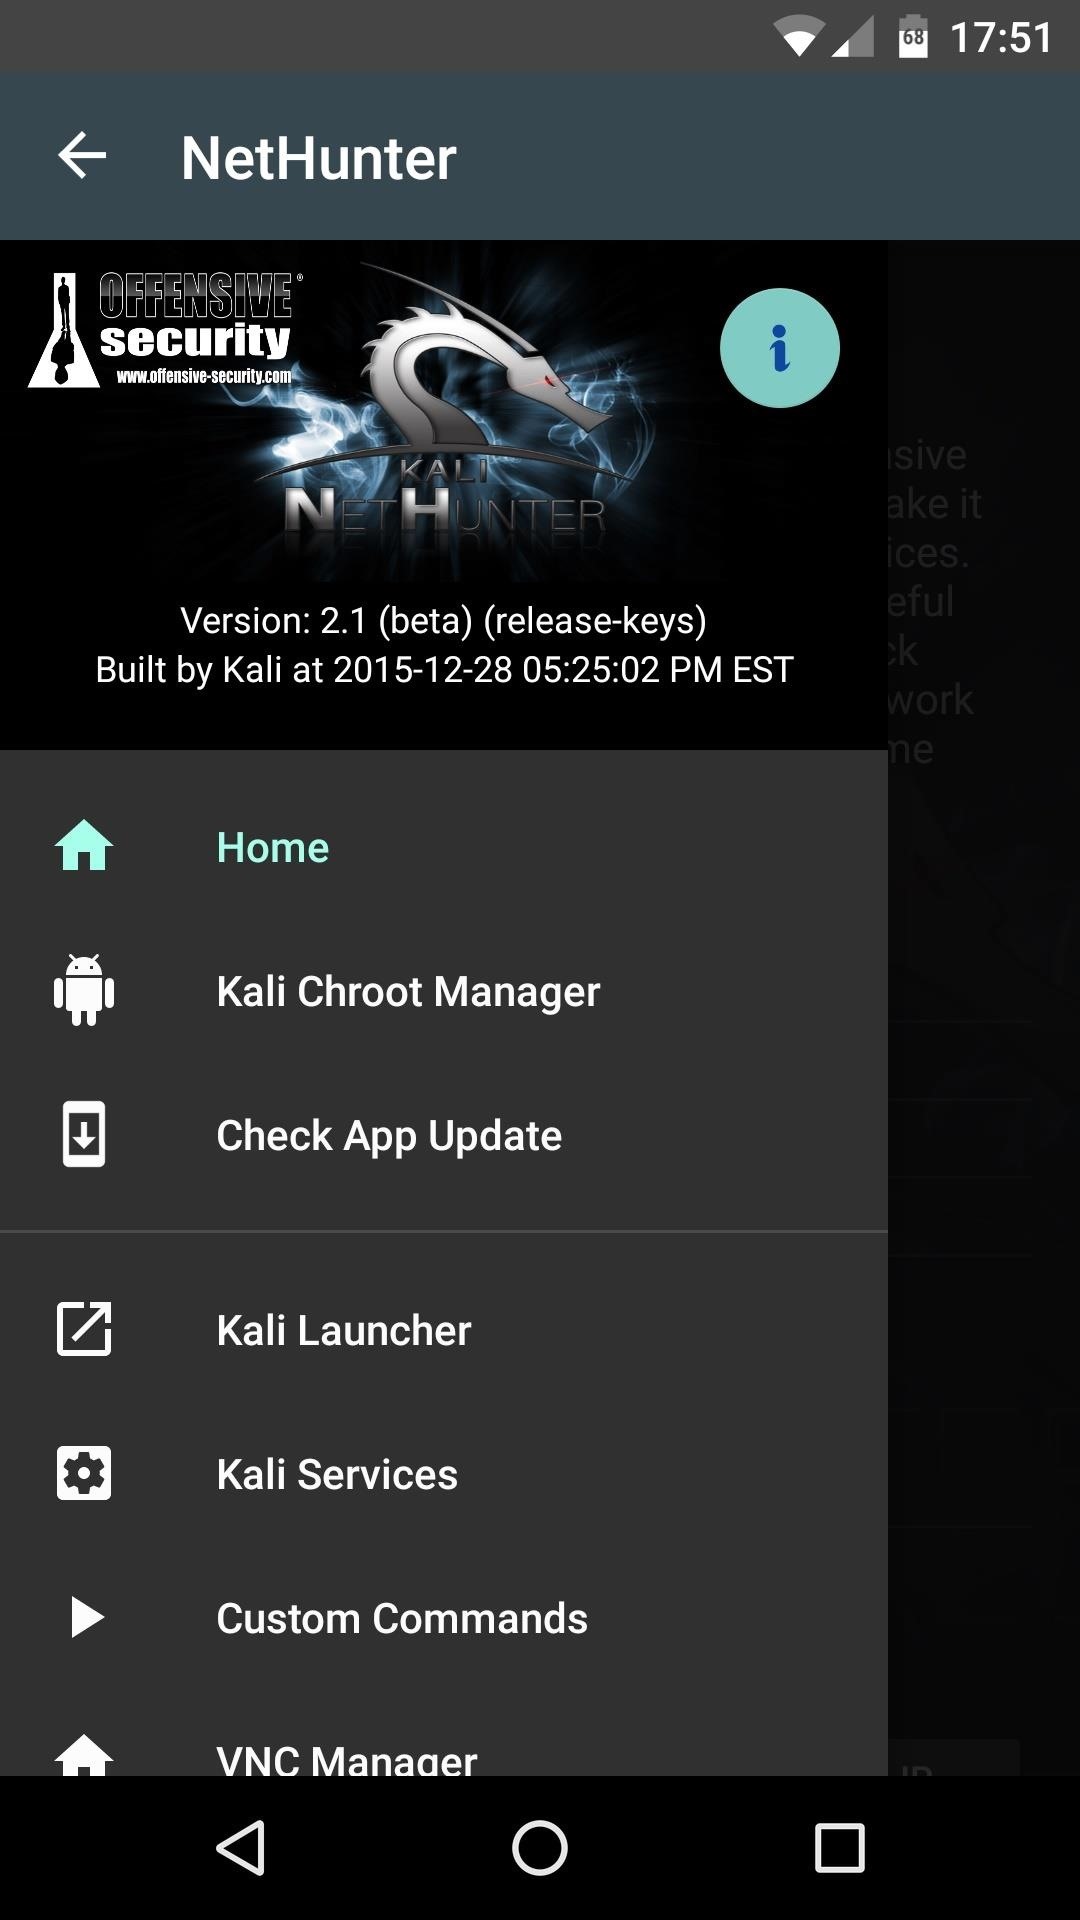 How to Build and Install Kali Nethunter (The New Version) On a Supported Android Device Running Android 6.0.1